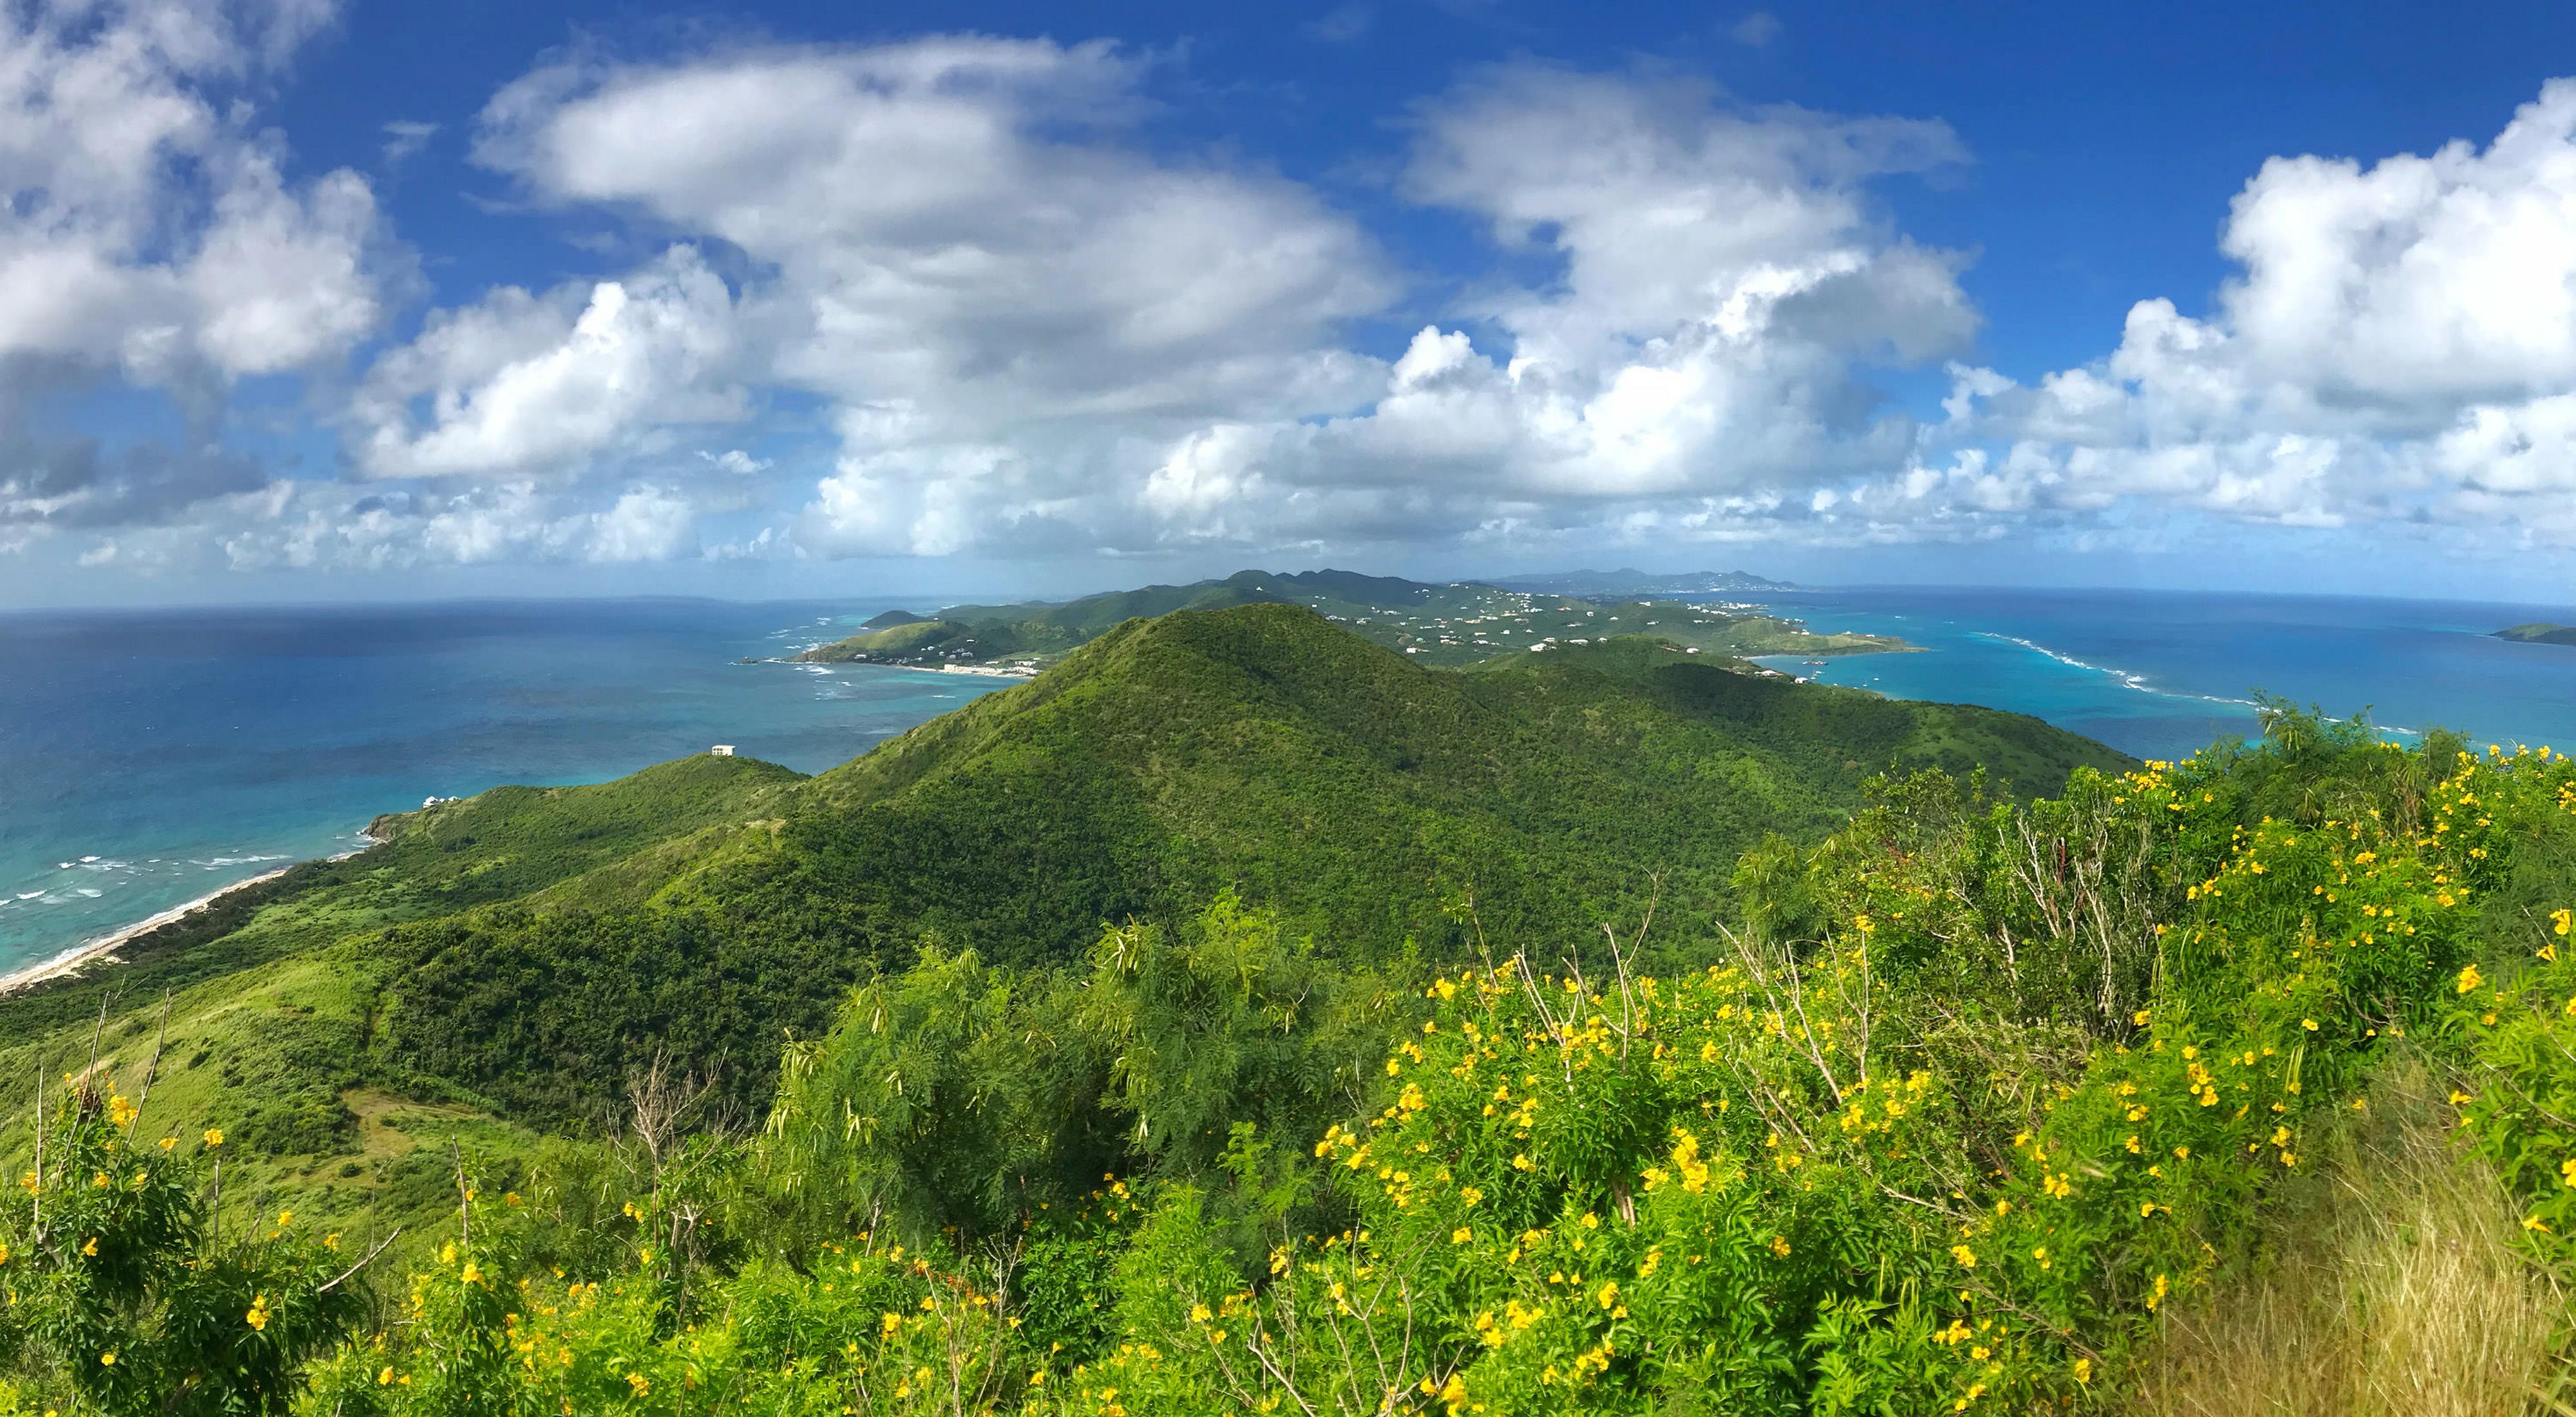 Landscape view from a high vantage point looking out across the island of St. Croix with its green tree-covered hills and blue ocean under a blue sky with white puffy clouds.